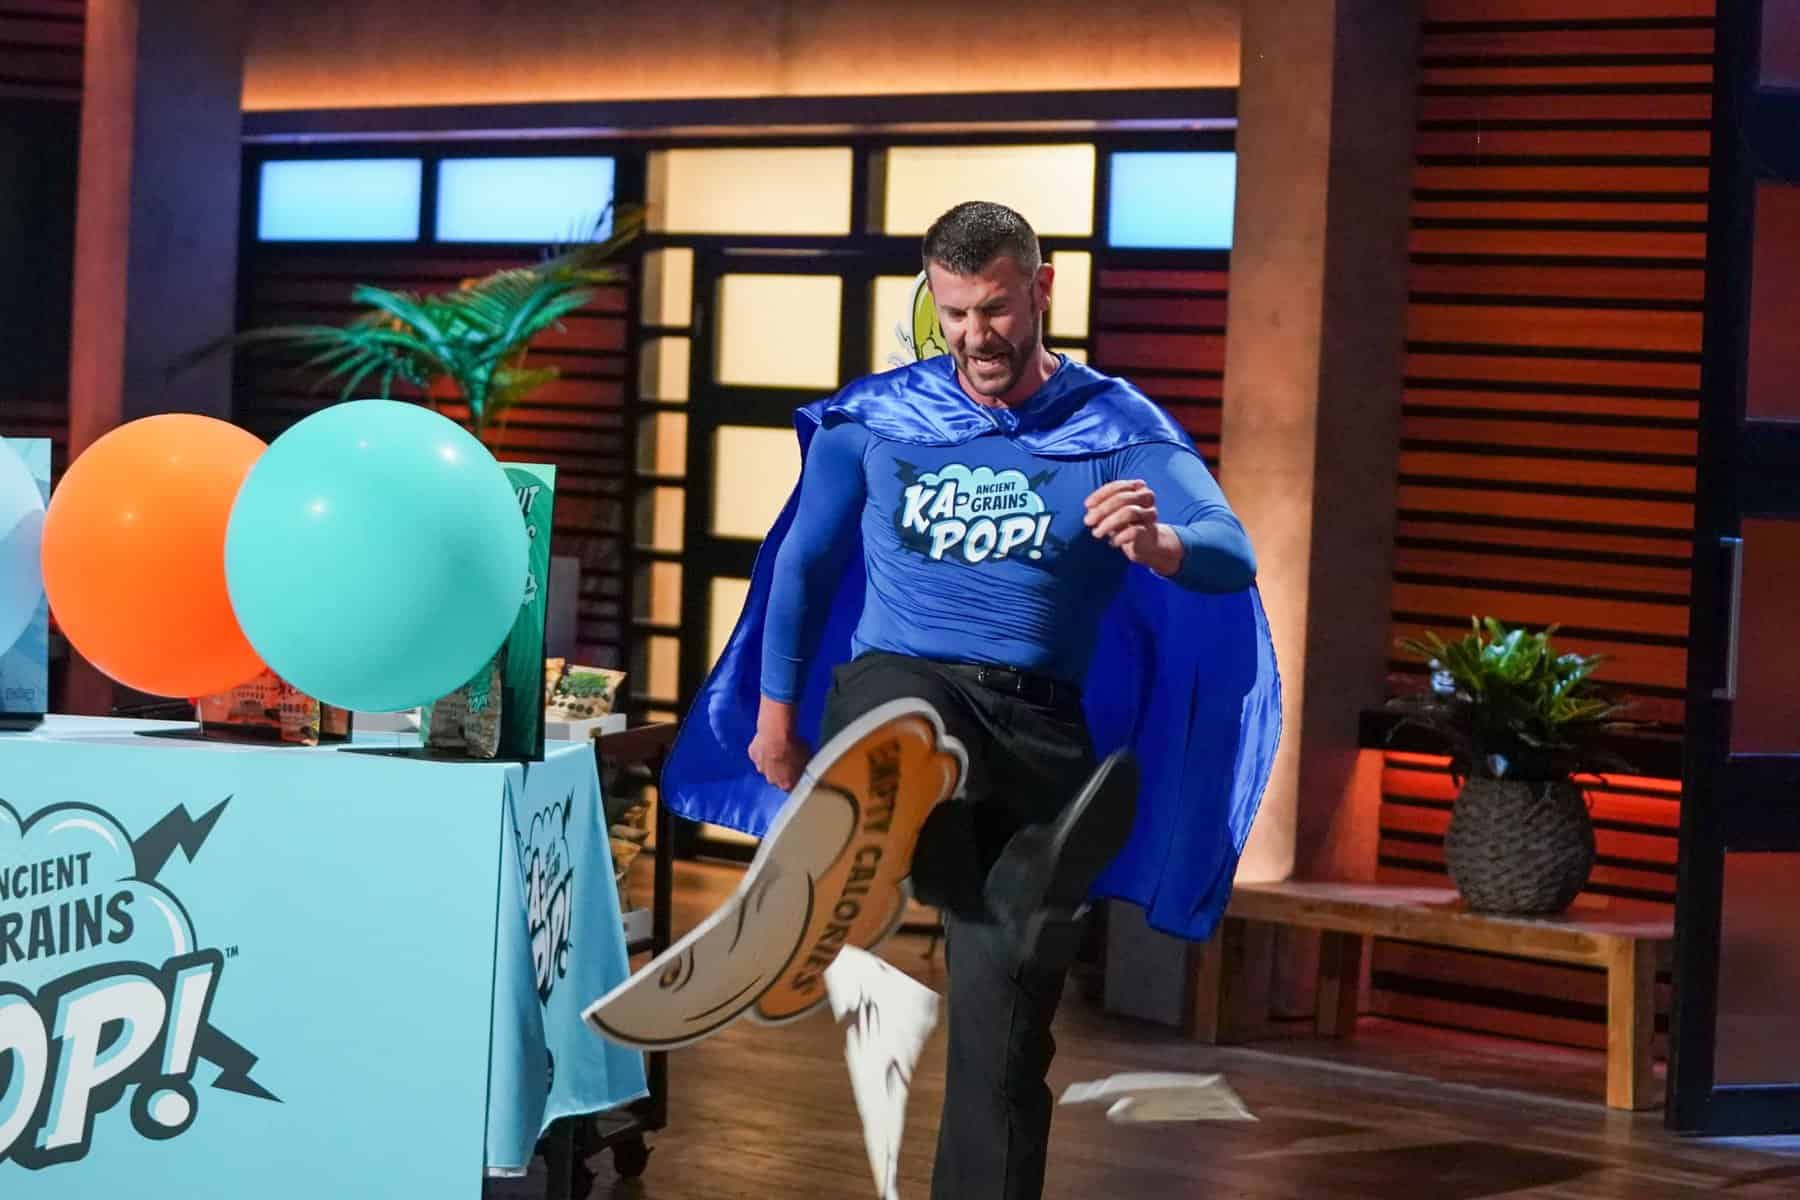 5 Surprising Things I Learned From Interviewing 100 'Shark Tank'  Entrepreneurs